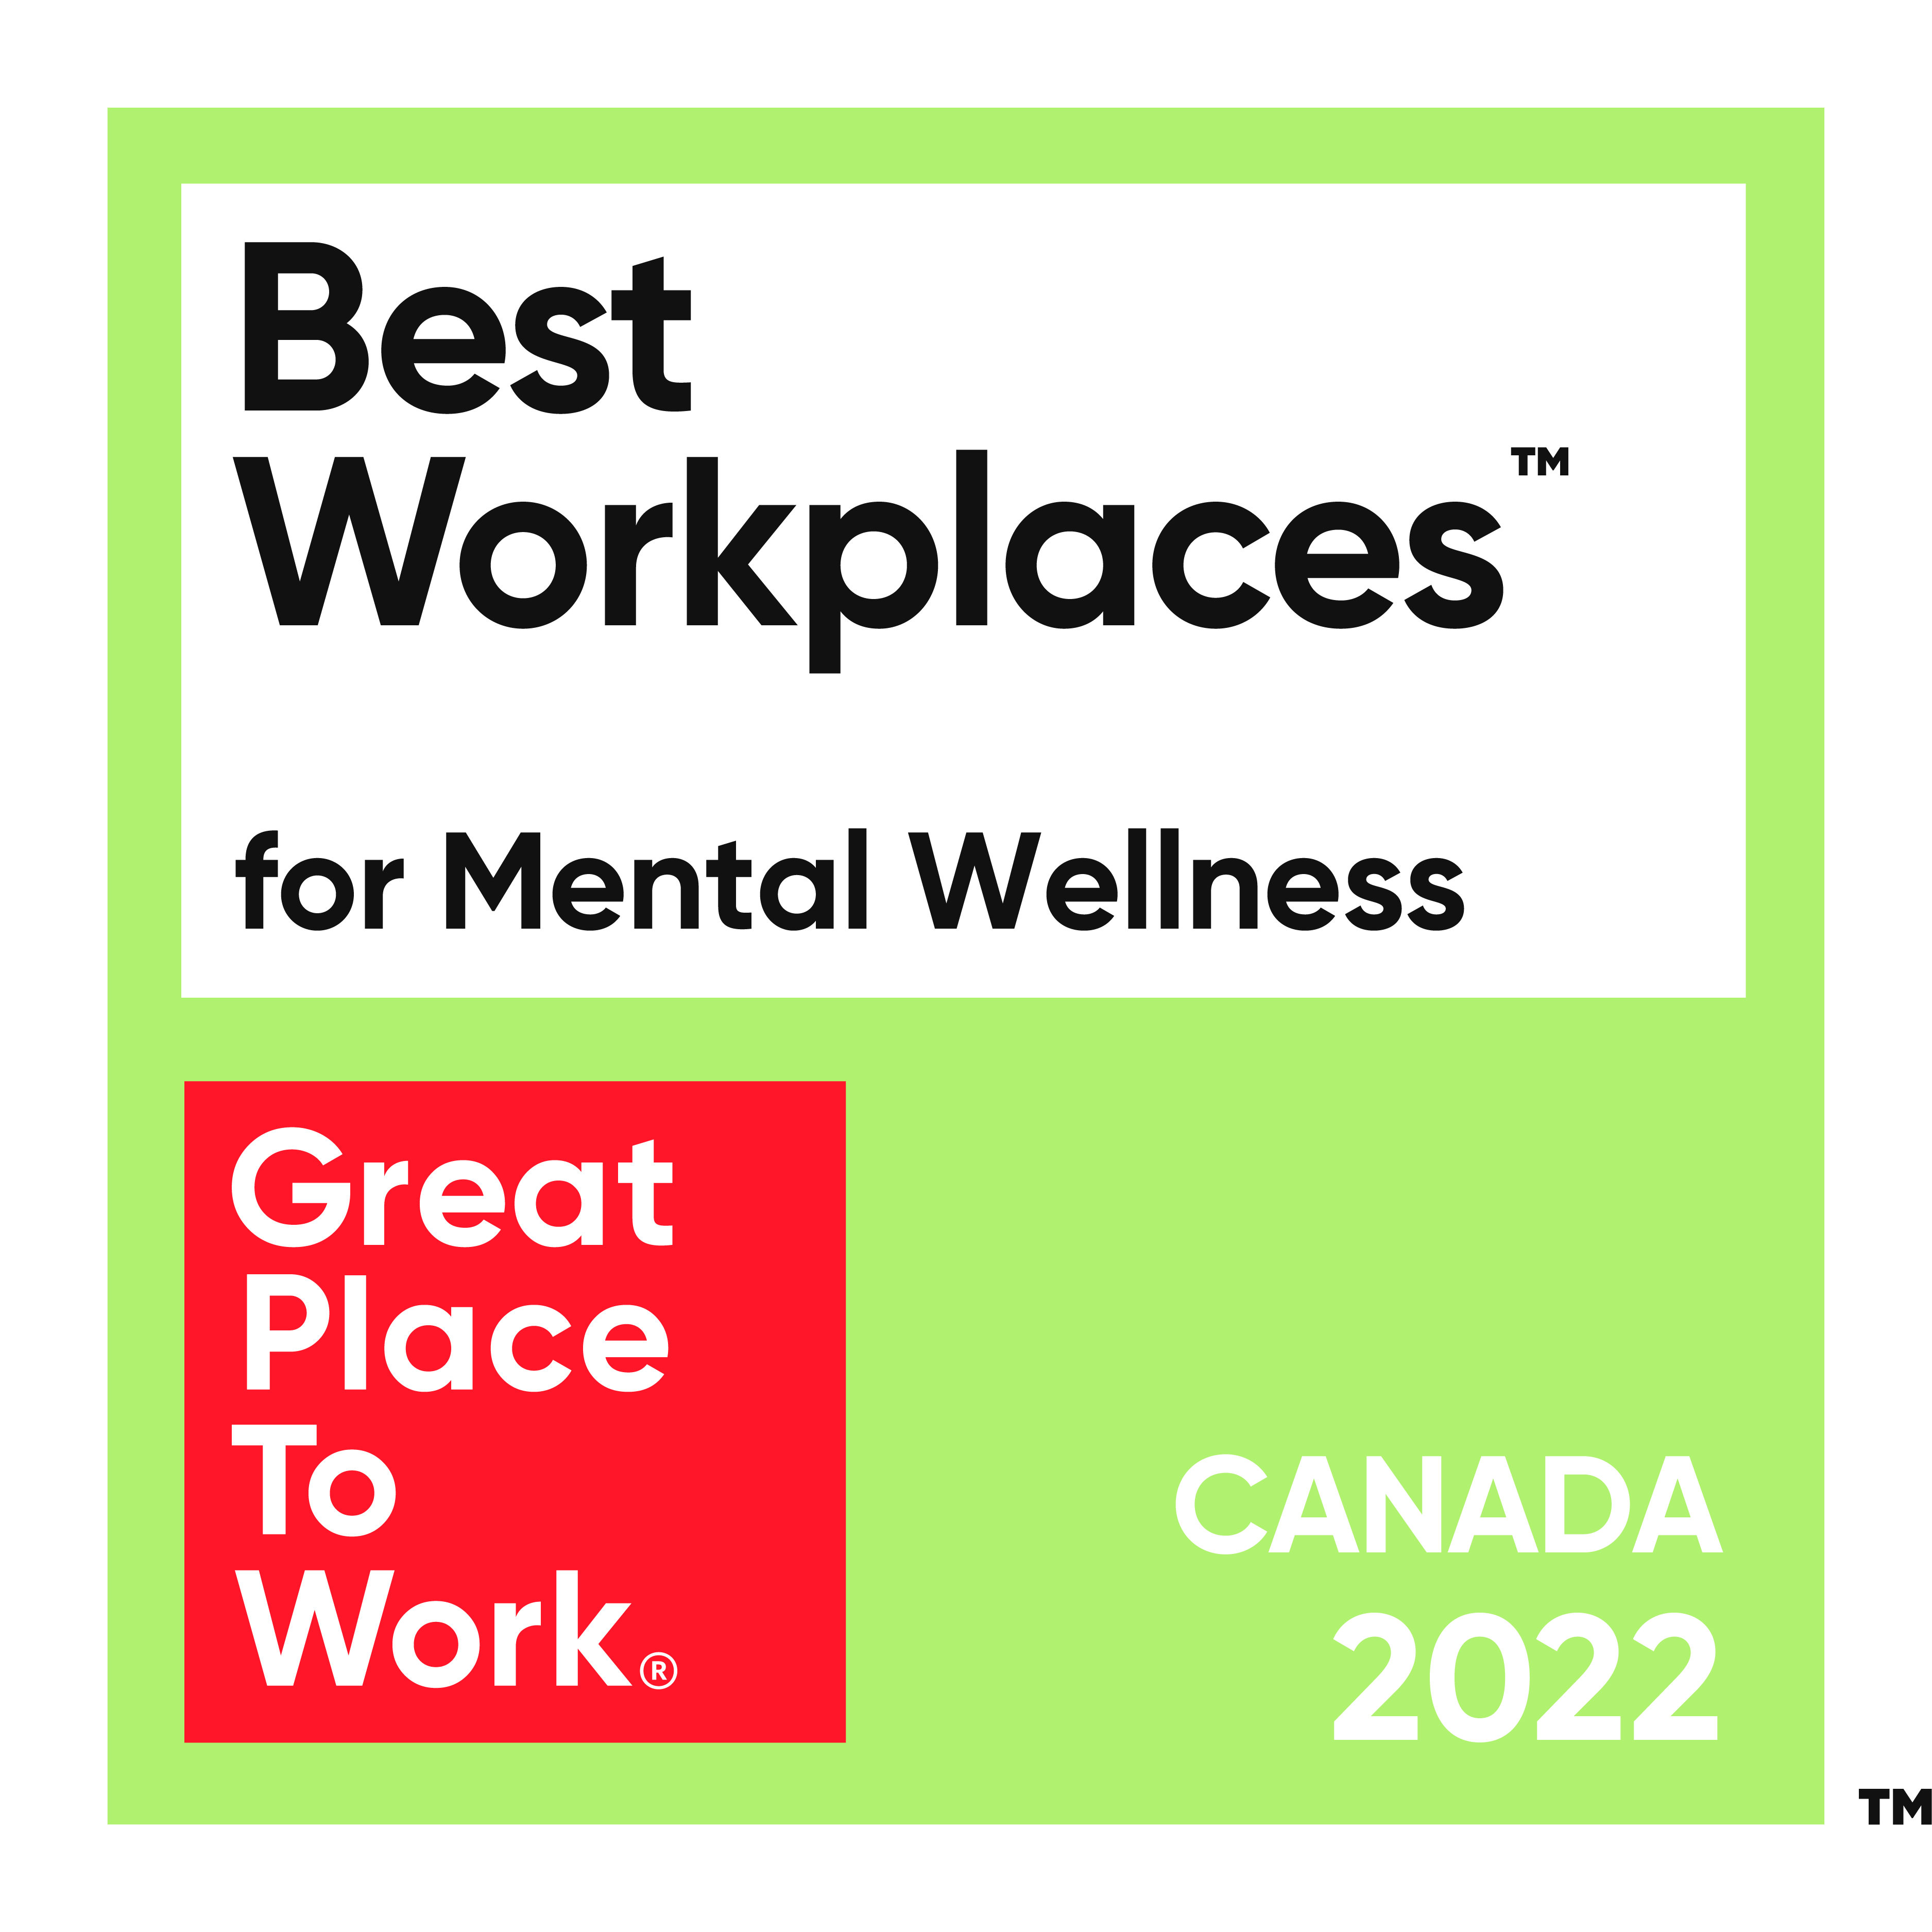 Best Workplaces for Mental Wellness, Great Place to Work, Canada 2022